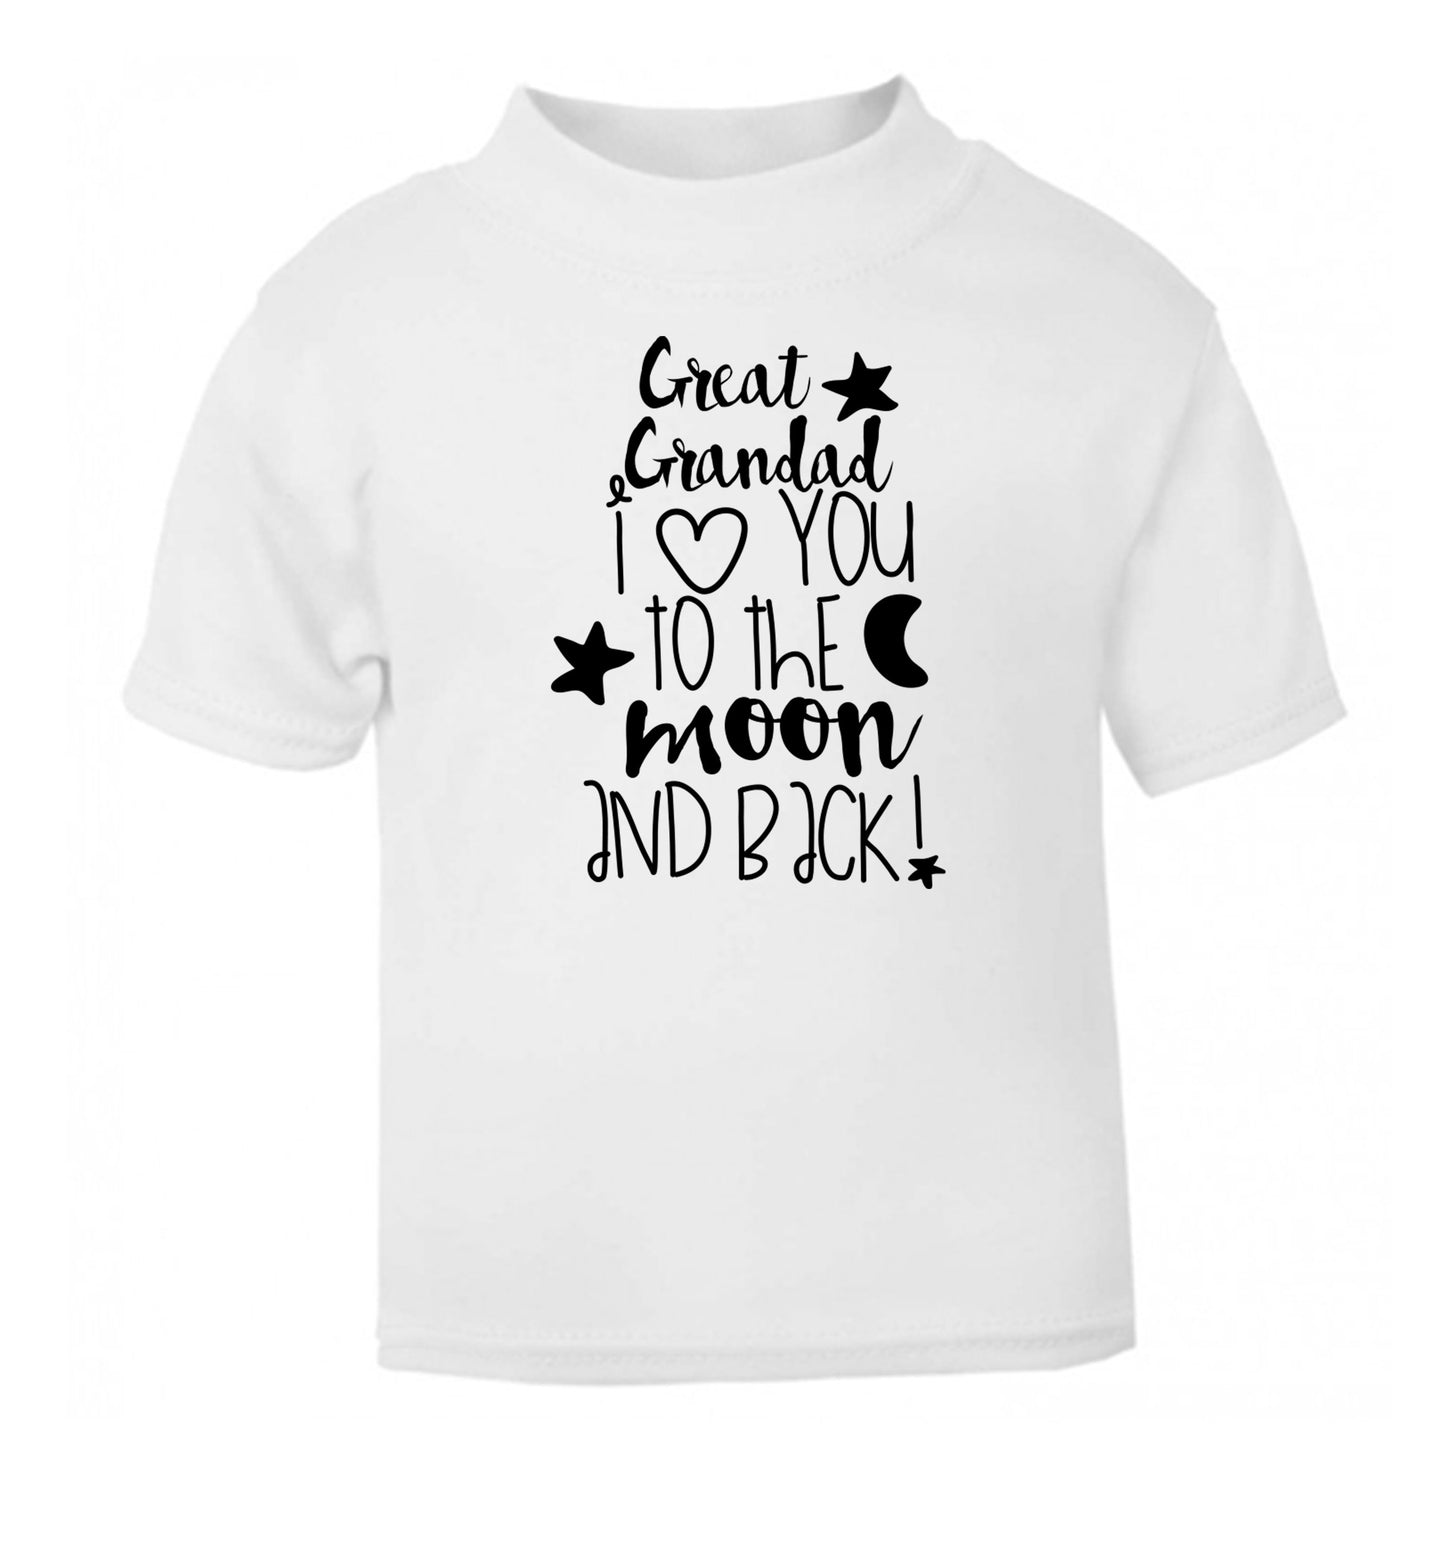 Great Grandad I love you to the moon and back white Baby Toddler Tshirt 2 Years